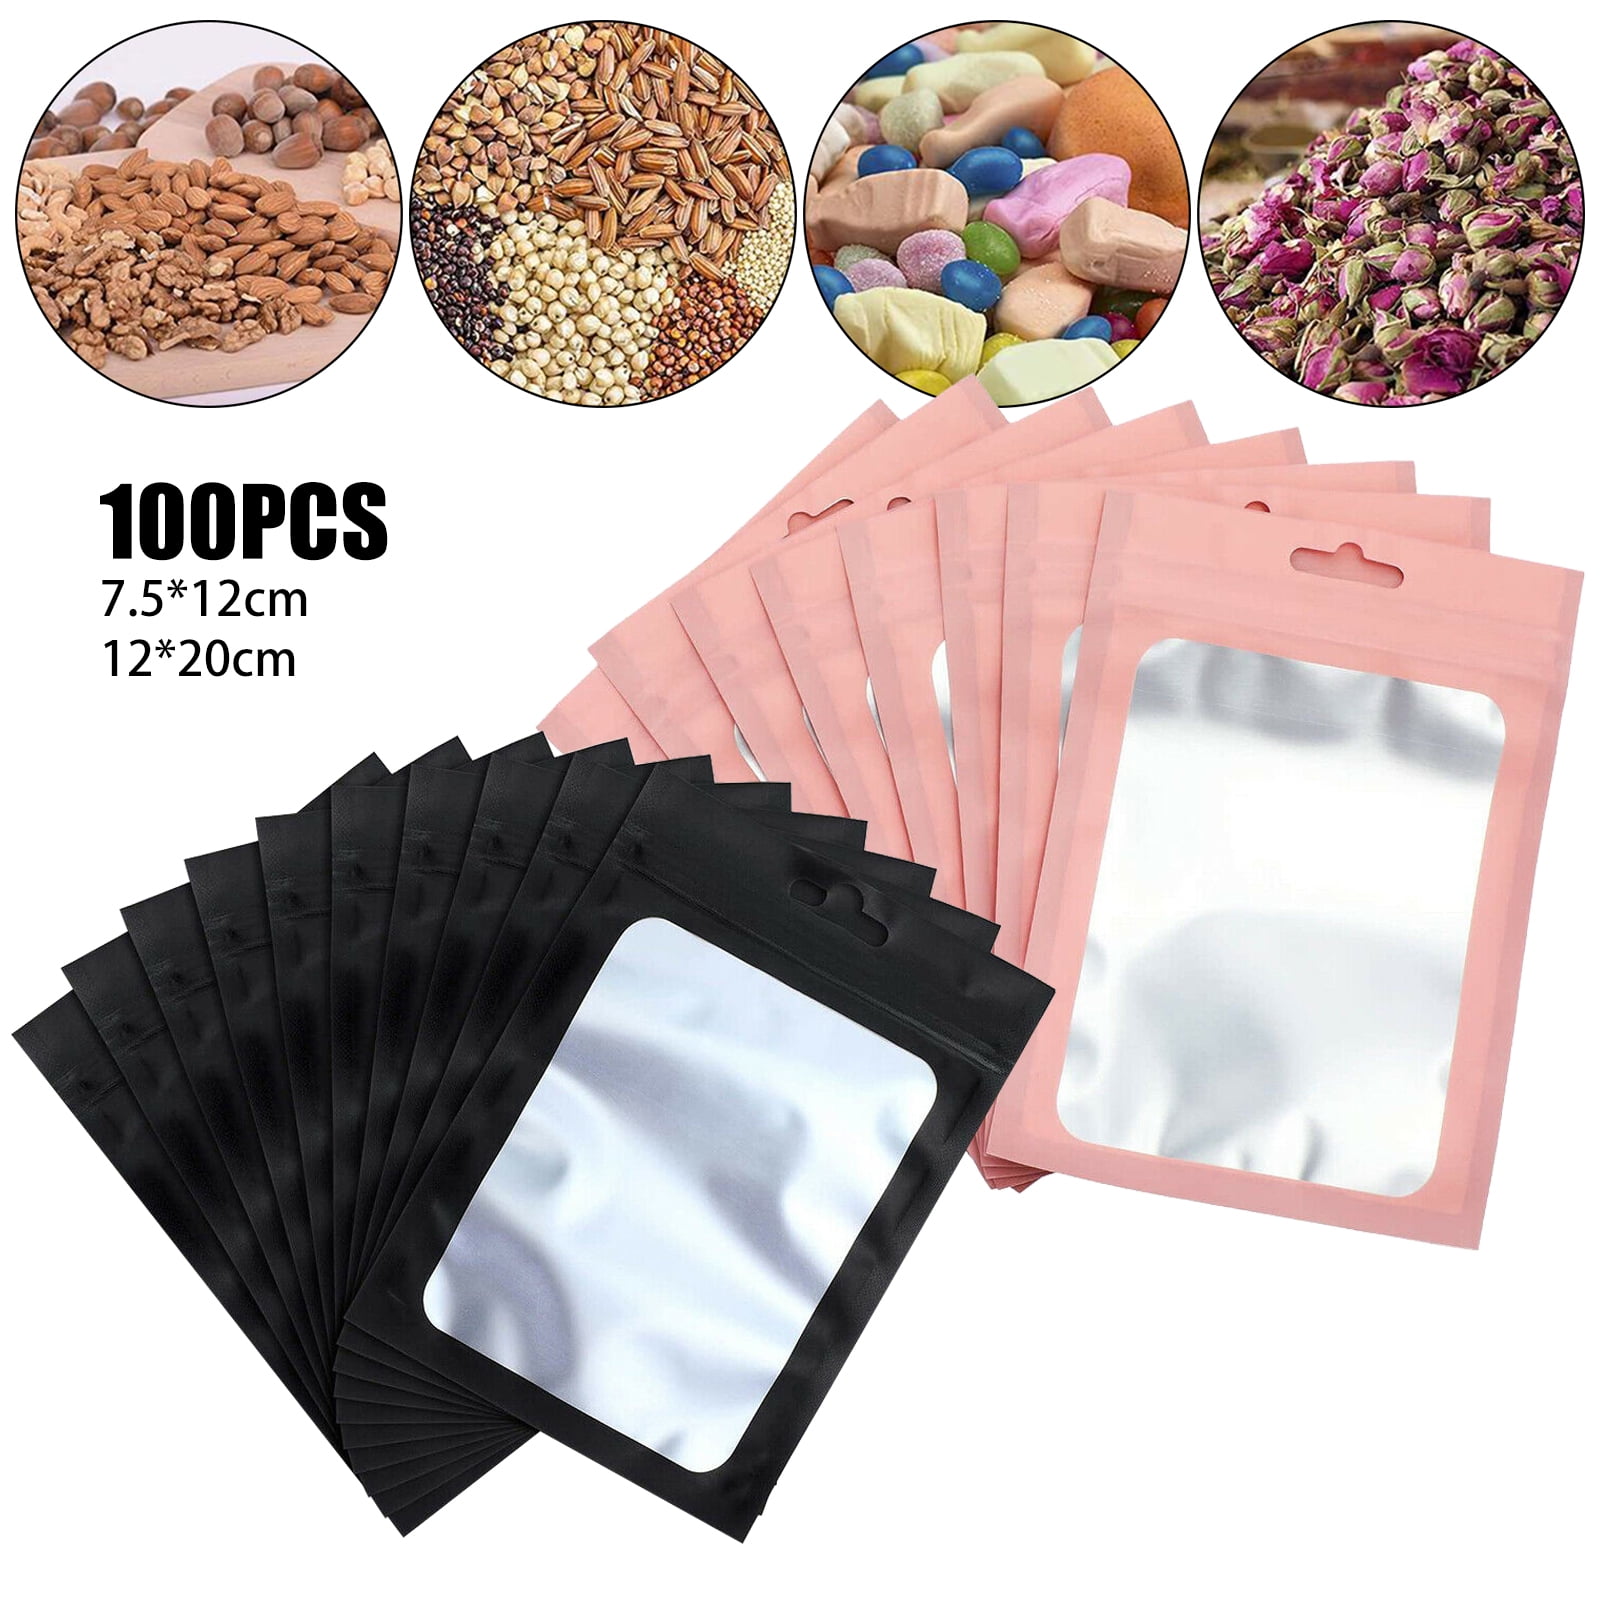 Details about   400PC Glossy White Clear 3x5" Mylar Ziplock Bags-Merchandise Food Storage Spice